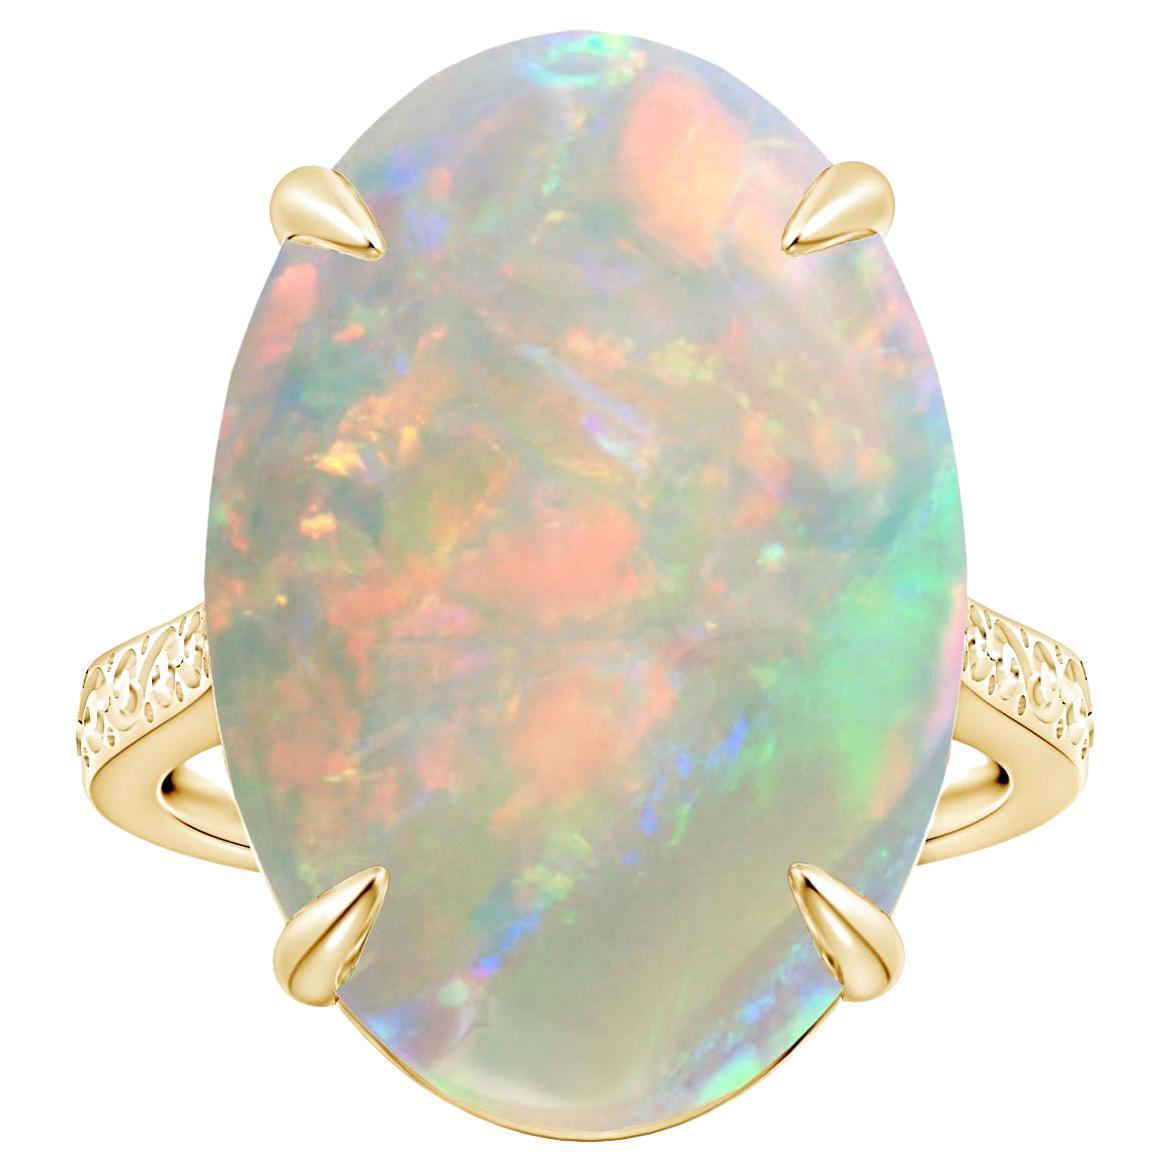 For Sale:  Angara Gia Certified Solitaire Opal Ring in Yellow Gold with Scrollwork